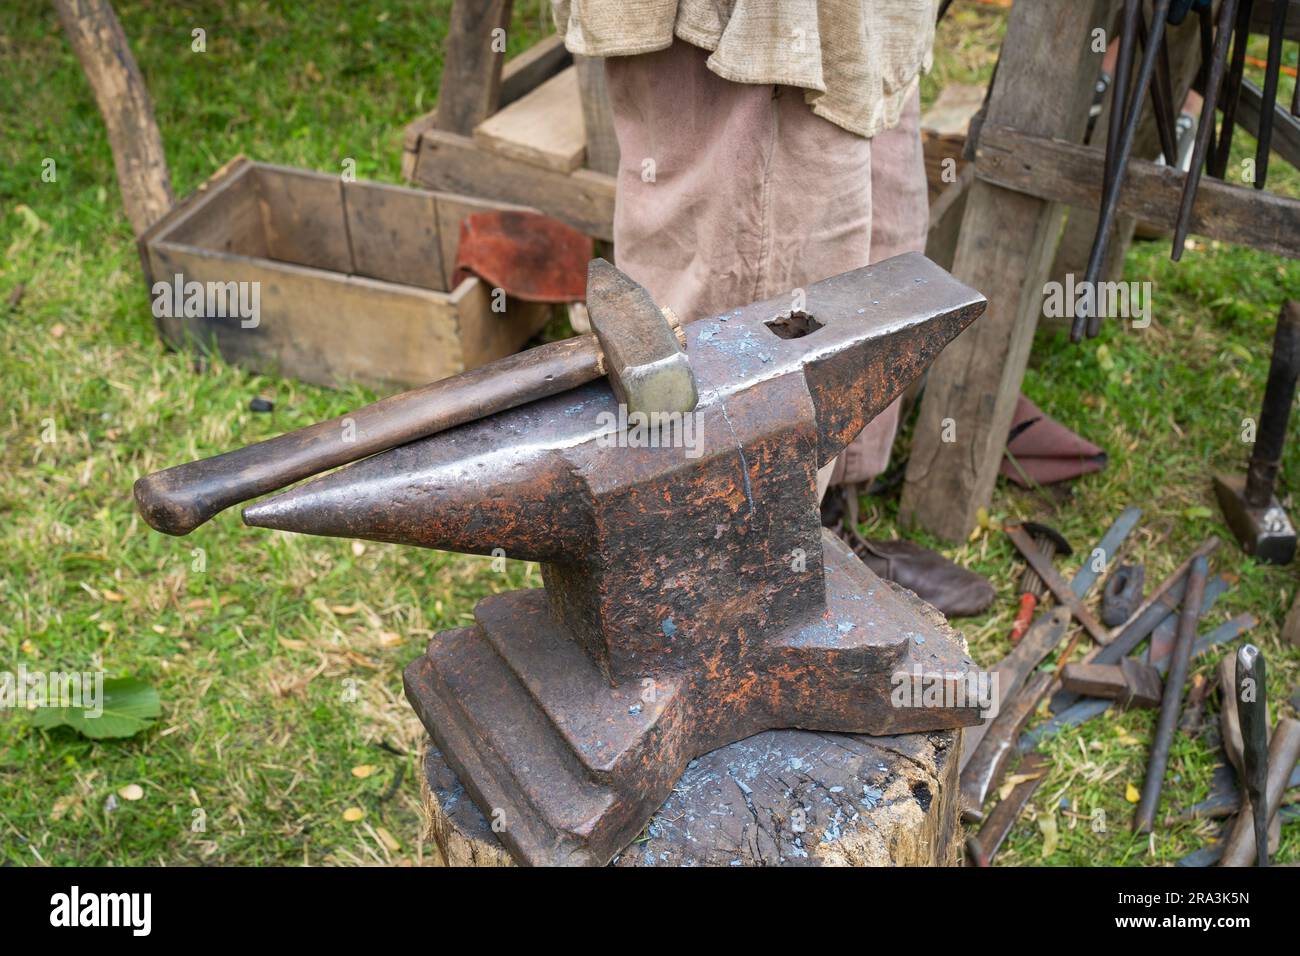 Blacksmith's anvil with hammer in the background with metal tools Stock Photo